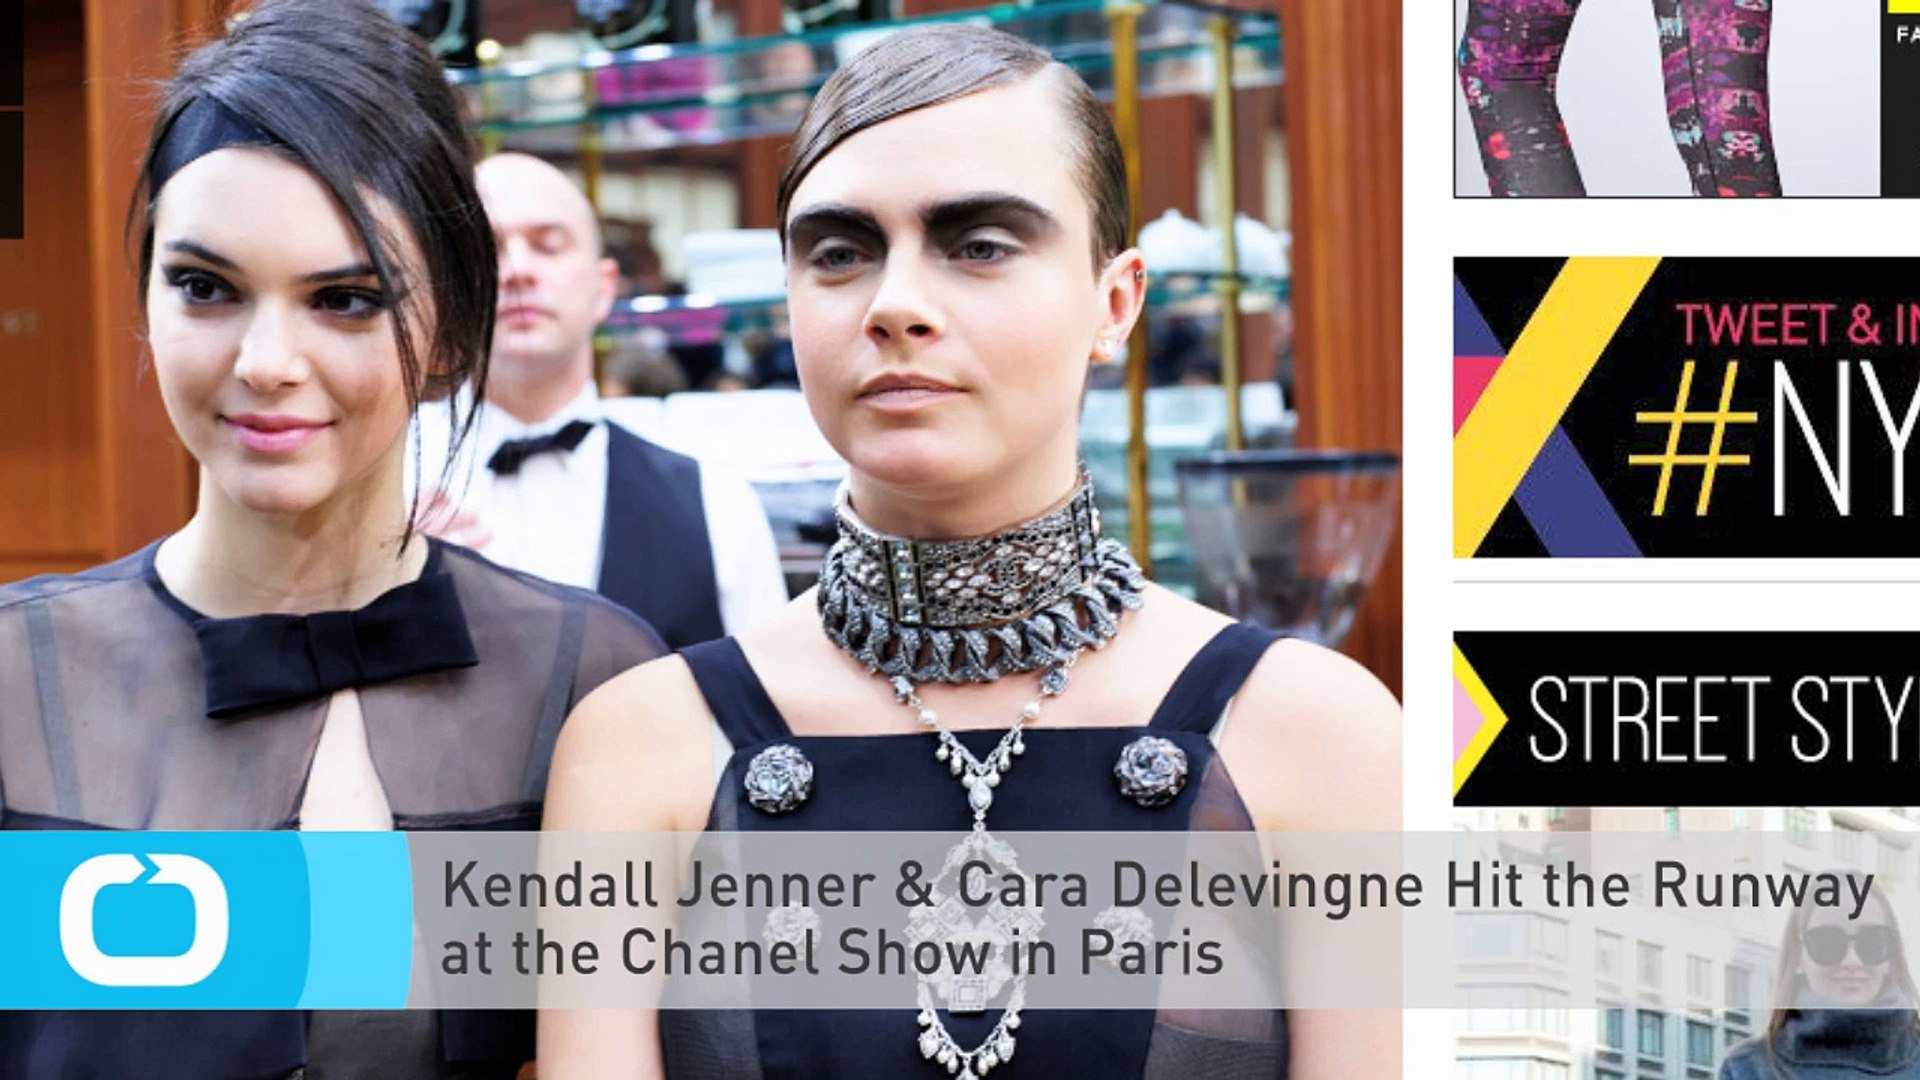 Cara Delevingne Ph On Twitter Cara Delevingne With Kendall